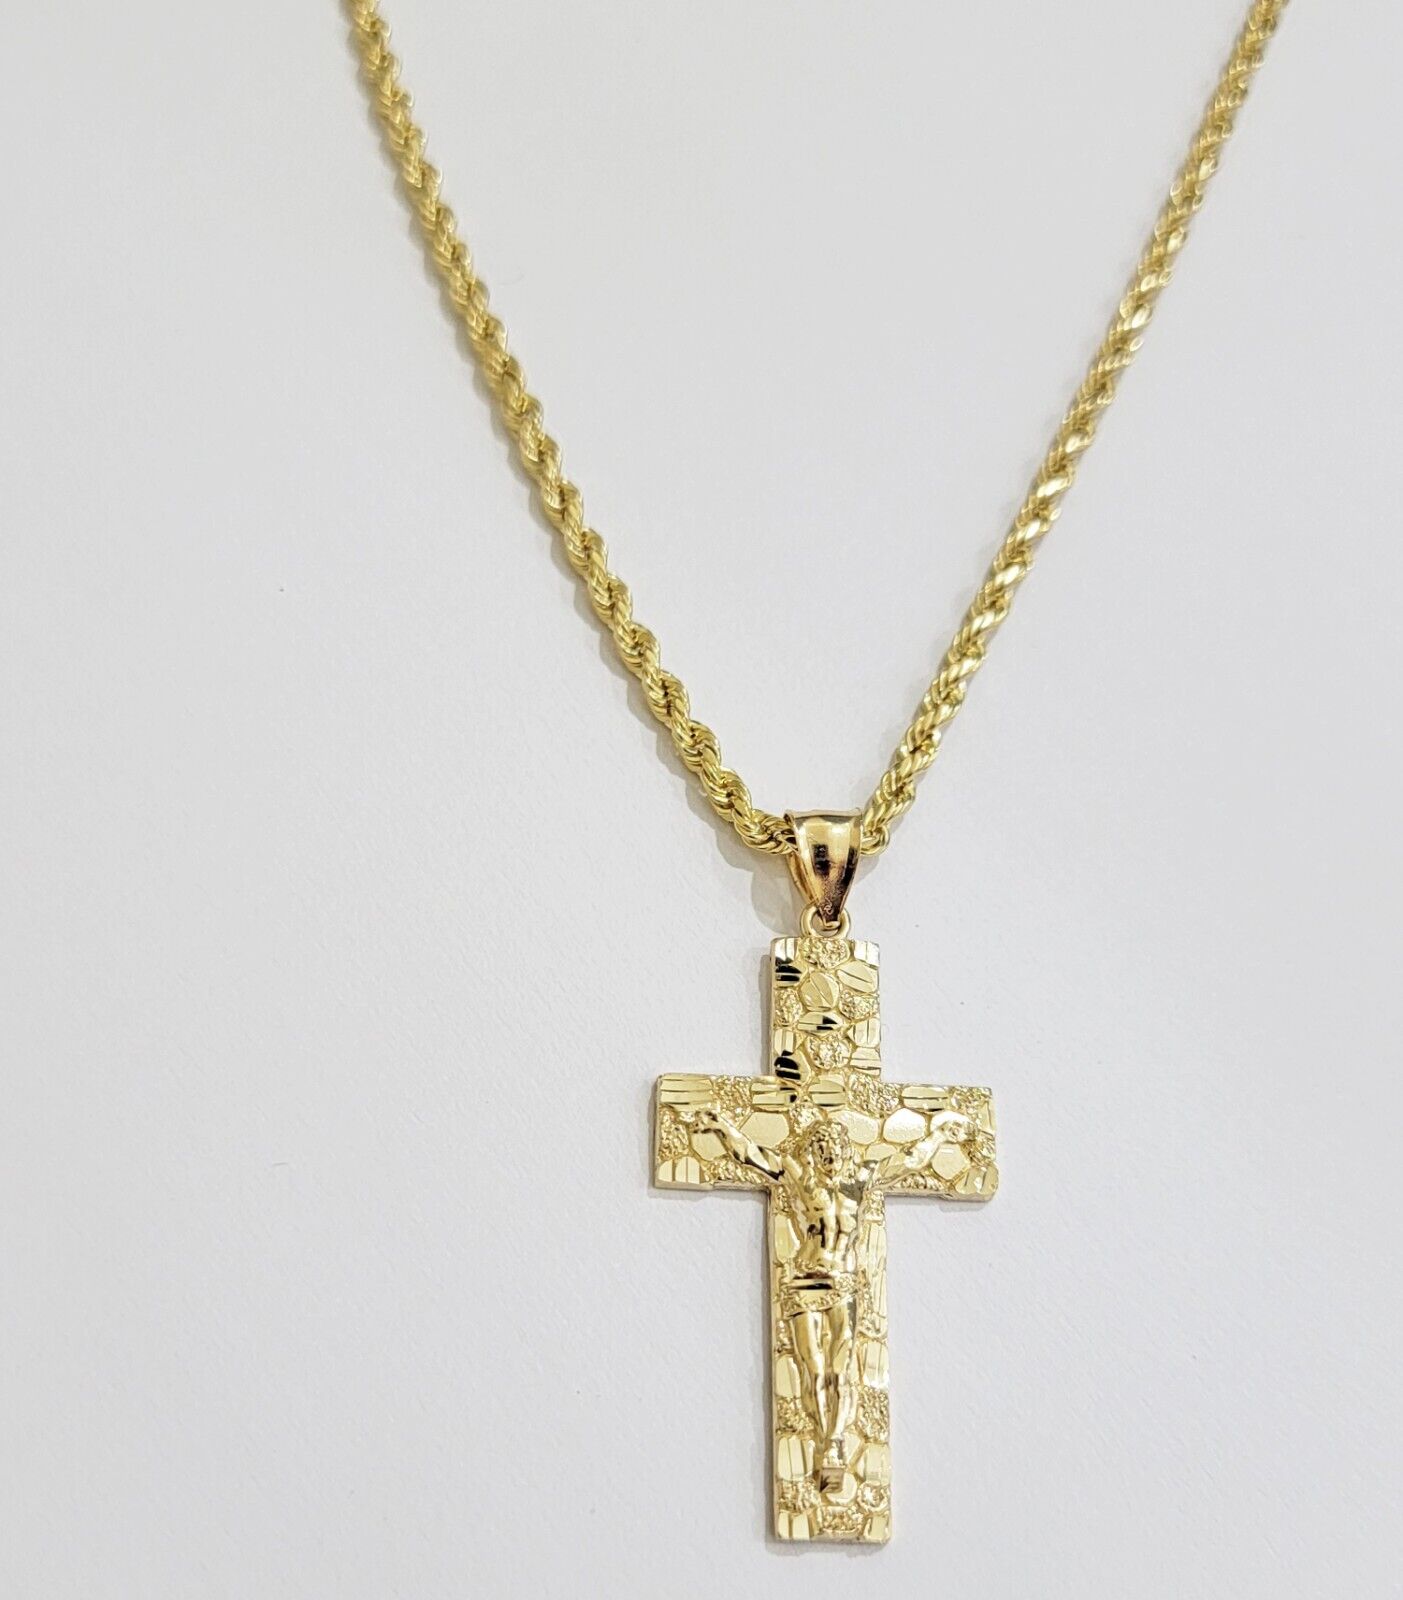 REAL 14k Gold Rope Chain Necklace Nugget Cross Charm Pendant SET 3mm 18 -26 Inch